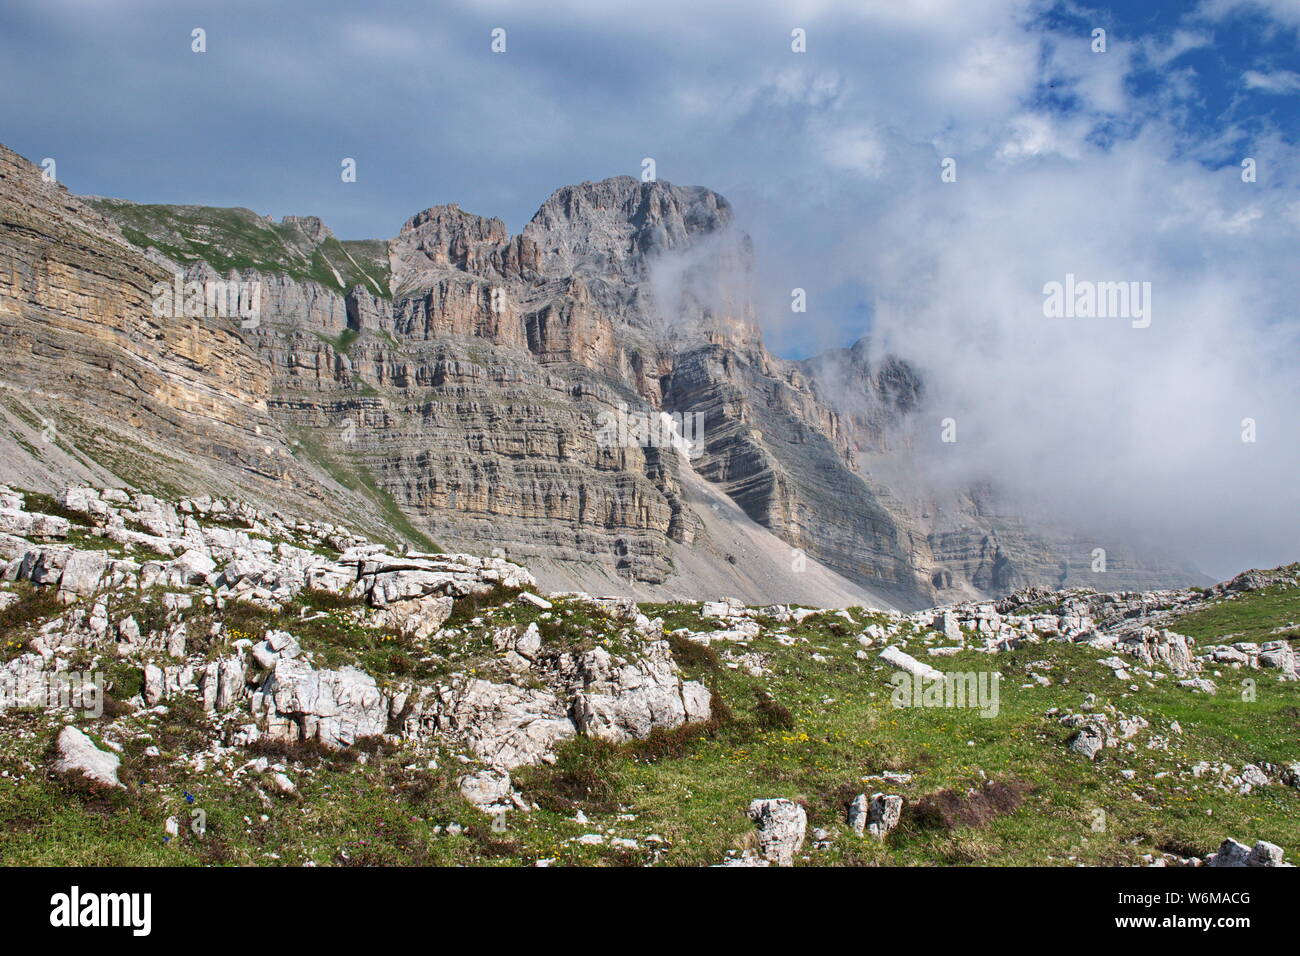 Scenic landscape of Dolomites mountains in Italy. Brenta Dolomites and it's rocky environment Stock Photo